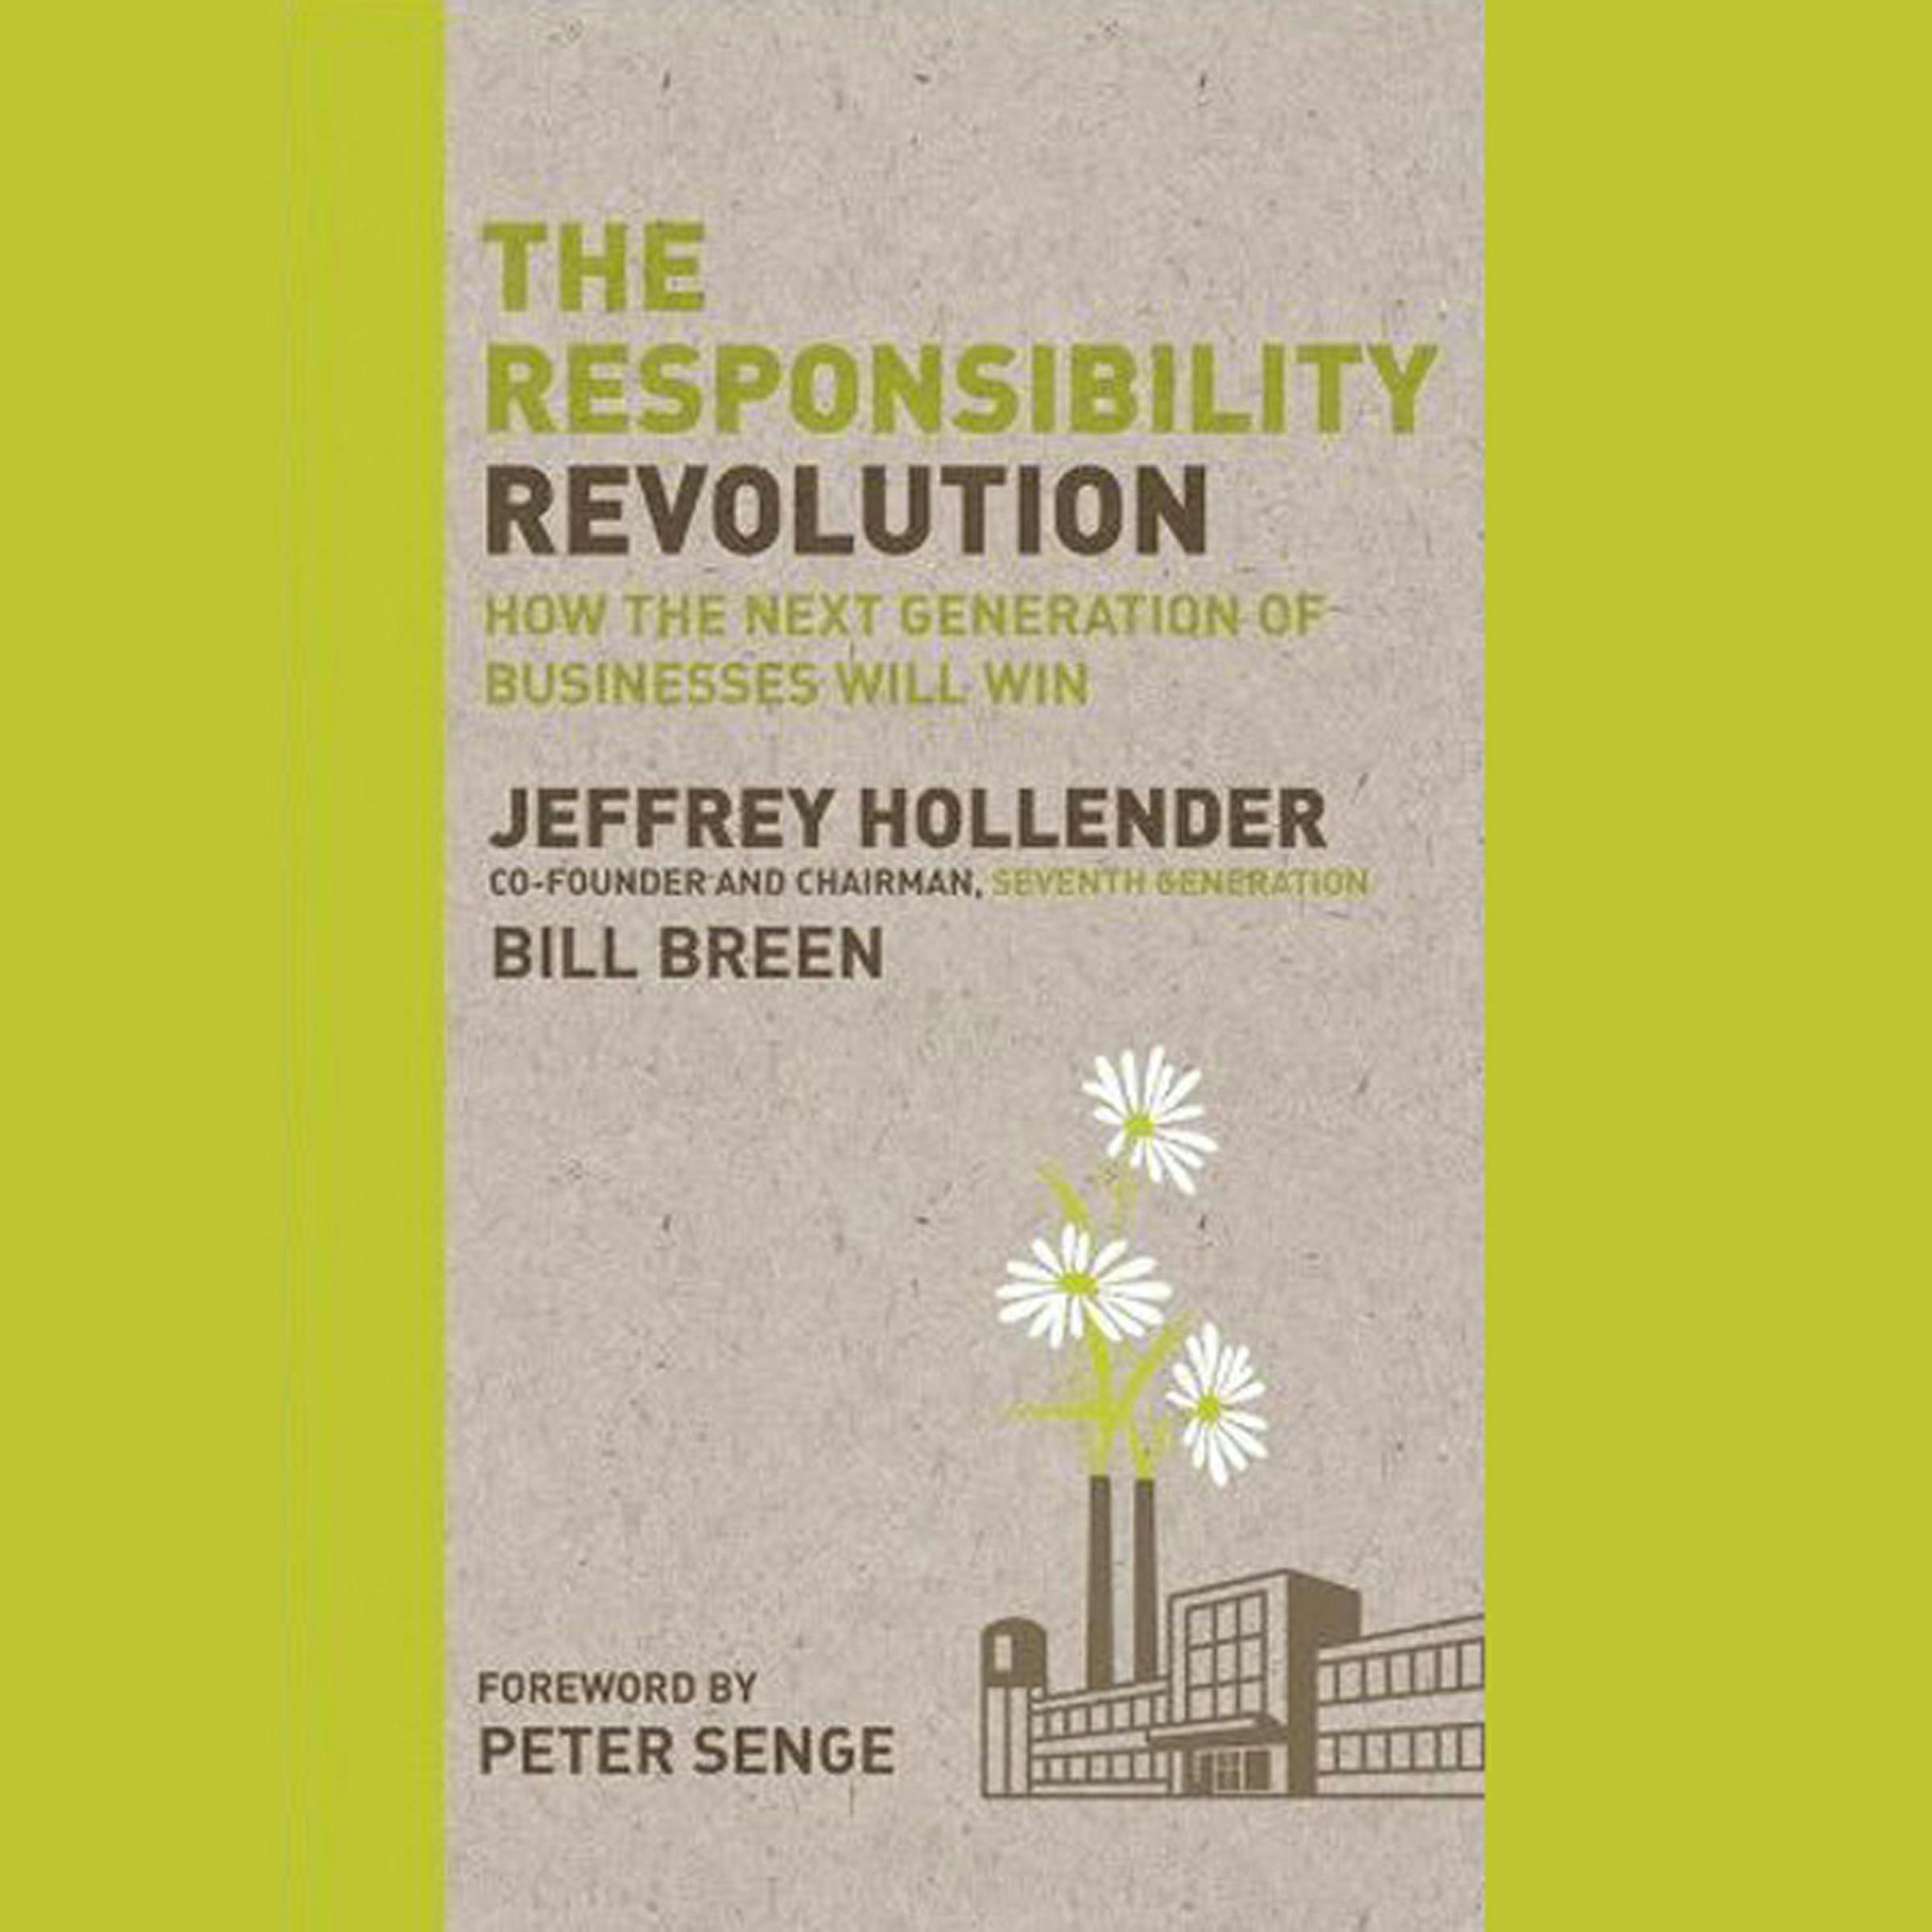 The Responsibility Revolution: How the Next Generation of Businesses Will Win - Bill Breen, Jeffrey Hollender, Peter Senge